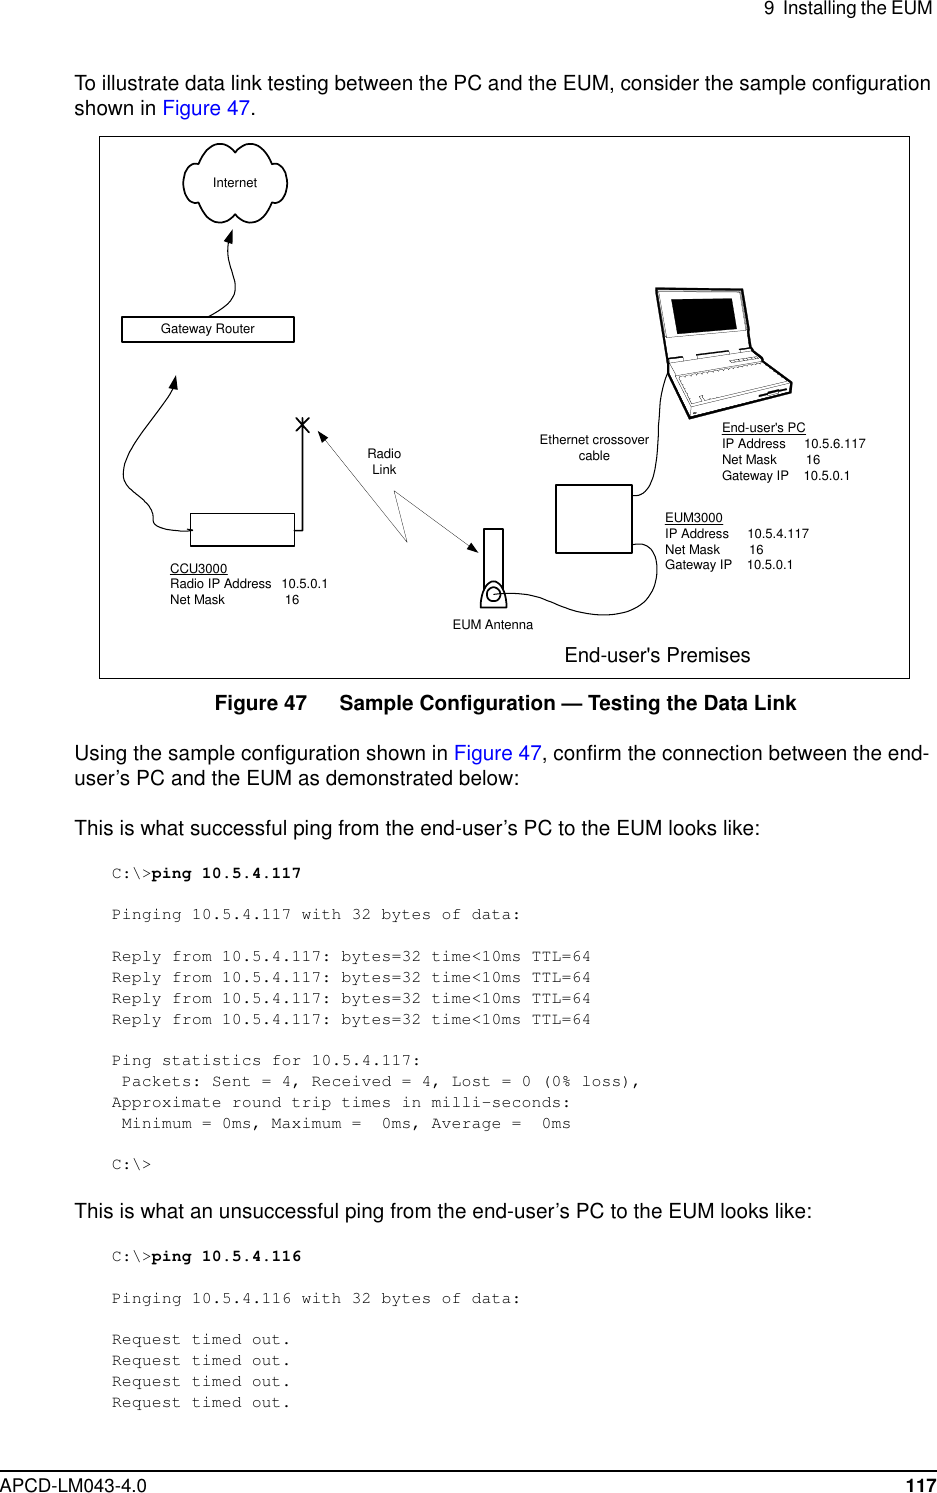 9 Installing the EUMAPCD-LM043-4.0 117To illustrate data link testing between the PC and the EUM, consider the sample configurationshown in Figure 47.Figure 47 Sample Configuration — Testing the Data LinkUsing the sample configuration shown in Figure 47, confirm the connection between the end-user’s PC and the EUM as demonstrated below:This is what successful ping from the end-user’s PC to the EUM looks like:C:\&gt;ping 10.5.4.117Pinging 10.5.4.117 with 32 bytes of data:Reply from 10.5.4.117: bytes=32 time&lt;10ms TTL=64Reply from 10.5.4.117: bytes=32 time&lt;10ms TTL=64Reply from 10.5.4.117: bytes=32 time&lt;10ms TTL=64Reply from 10.5.4.117: bytes=32 time&lt;10ms TTL=64Ping statistics for 10.5.4.117:Packets: Sent = 4, Received = 4, Lost = 0 (0% loss),Approximate round trip times in milli-seconds:Minimum = 0ms, Maximum = 0ms, Average = 0msC:\&gt;This is what an unsuccessful ping from the end-user’s PC to the EUM looks like:C:\&gt;ping 10.5.4.116Pinging 10.5.4.116 with 32 bytes of data:Request timed out.Request timed out.Request timed out.Request timed out.Ethernet crossovercableEUM AntennaGateway RouterInternetRadioLinkEnd-user&apos;s PremisesEnd-user&apos;s PCIP Address 10.5.6.117Net Mask 16Gateway IP 10.5.0.1EUM3000IP Address 10.5.4.117Net Mask 16Gateway IP 10.5.0.1CCU3000Radio IP Address 10.5.0.1Net Mask 16